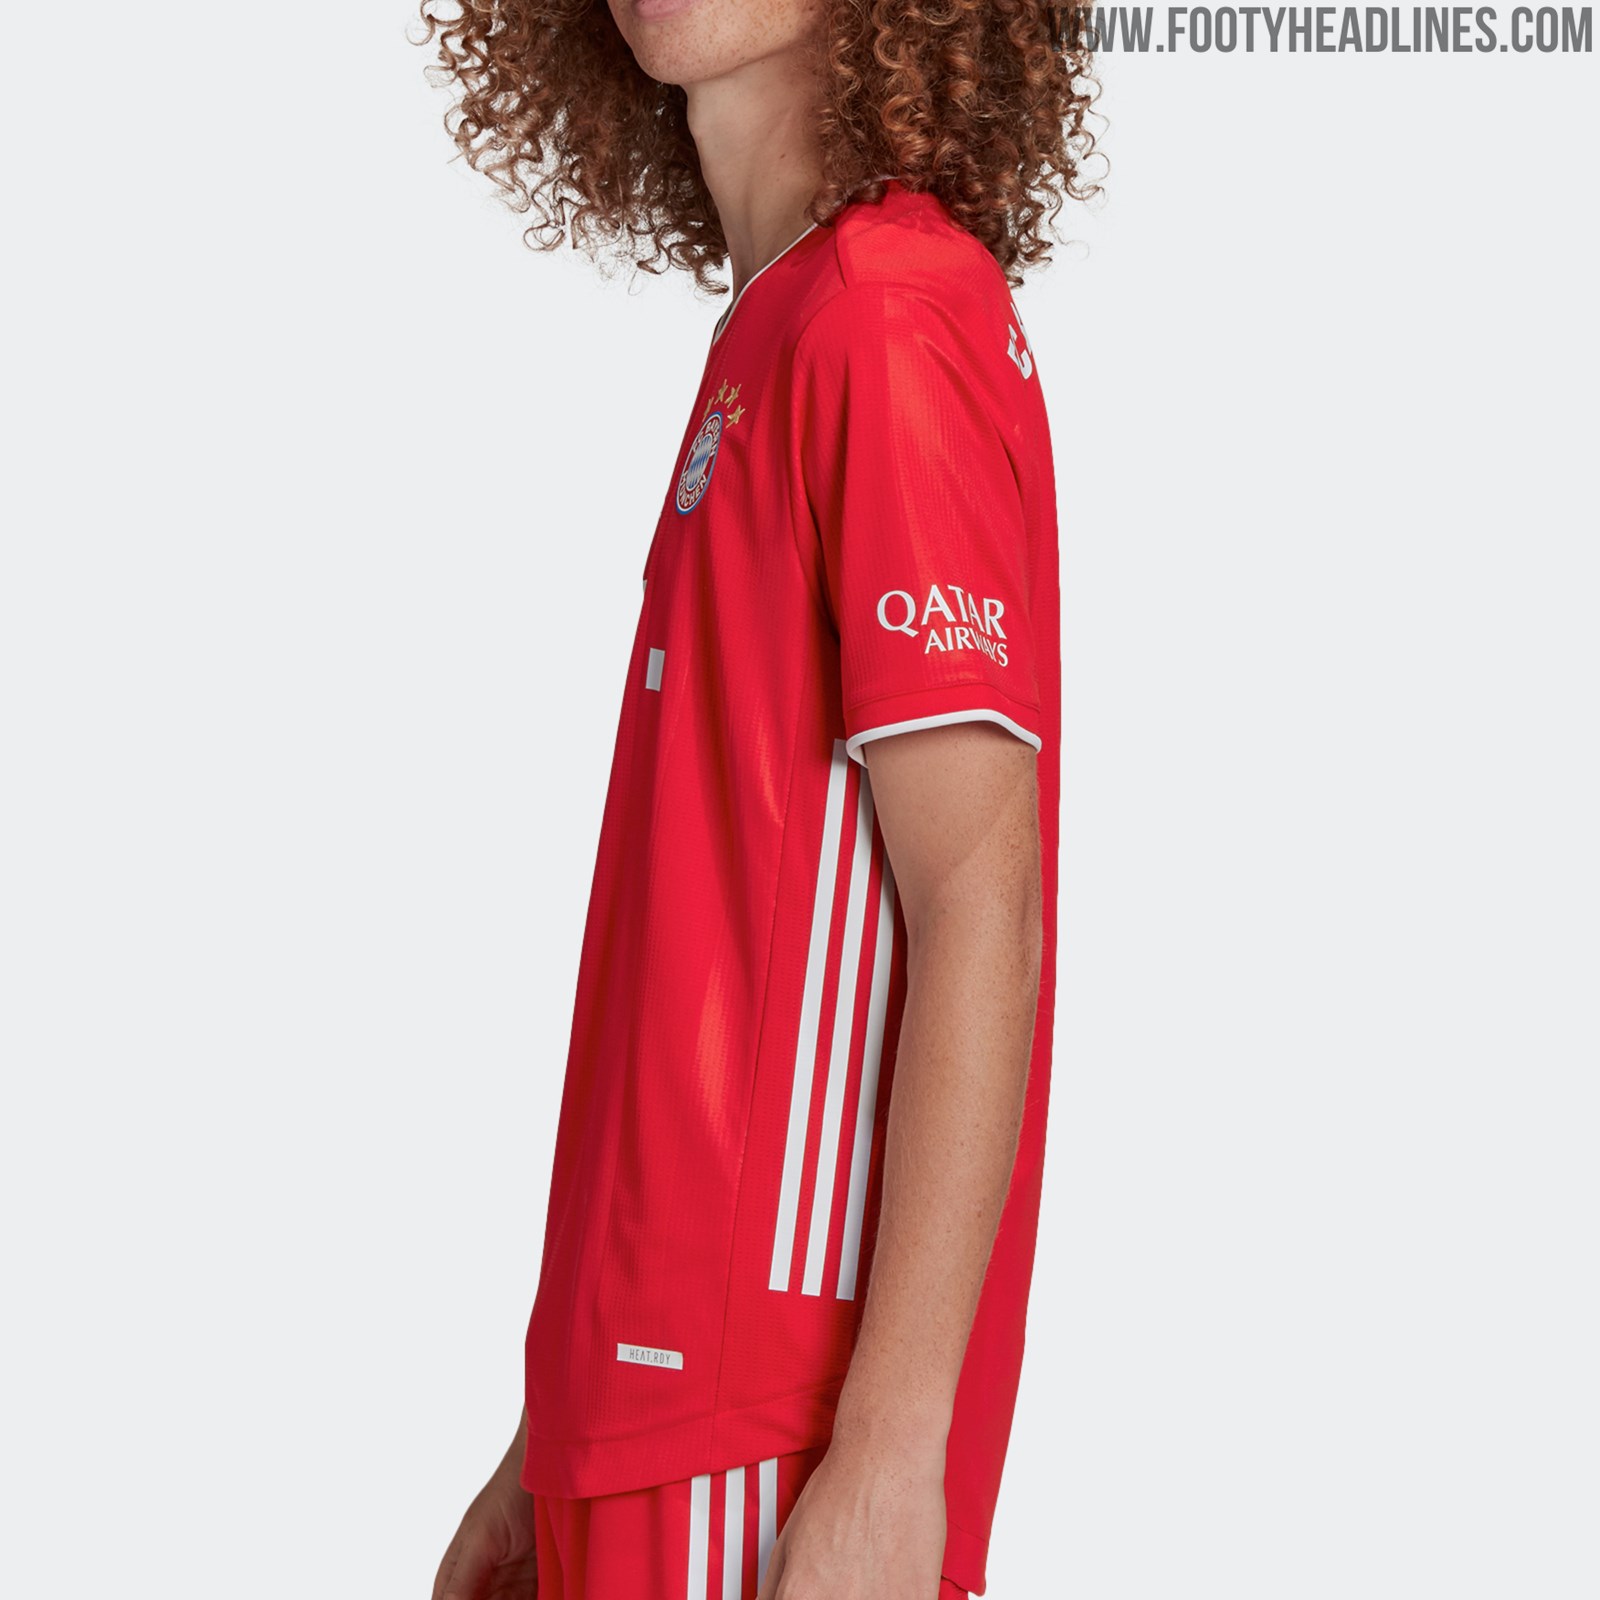 launching new FC Bayern Munich 2020/21 home jersey – a classic look for the  record-breaking German club